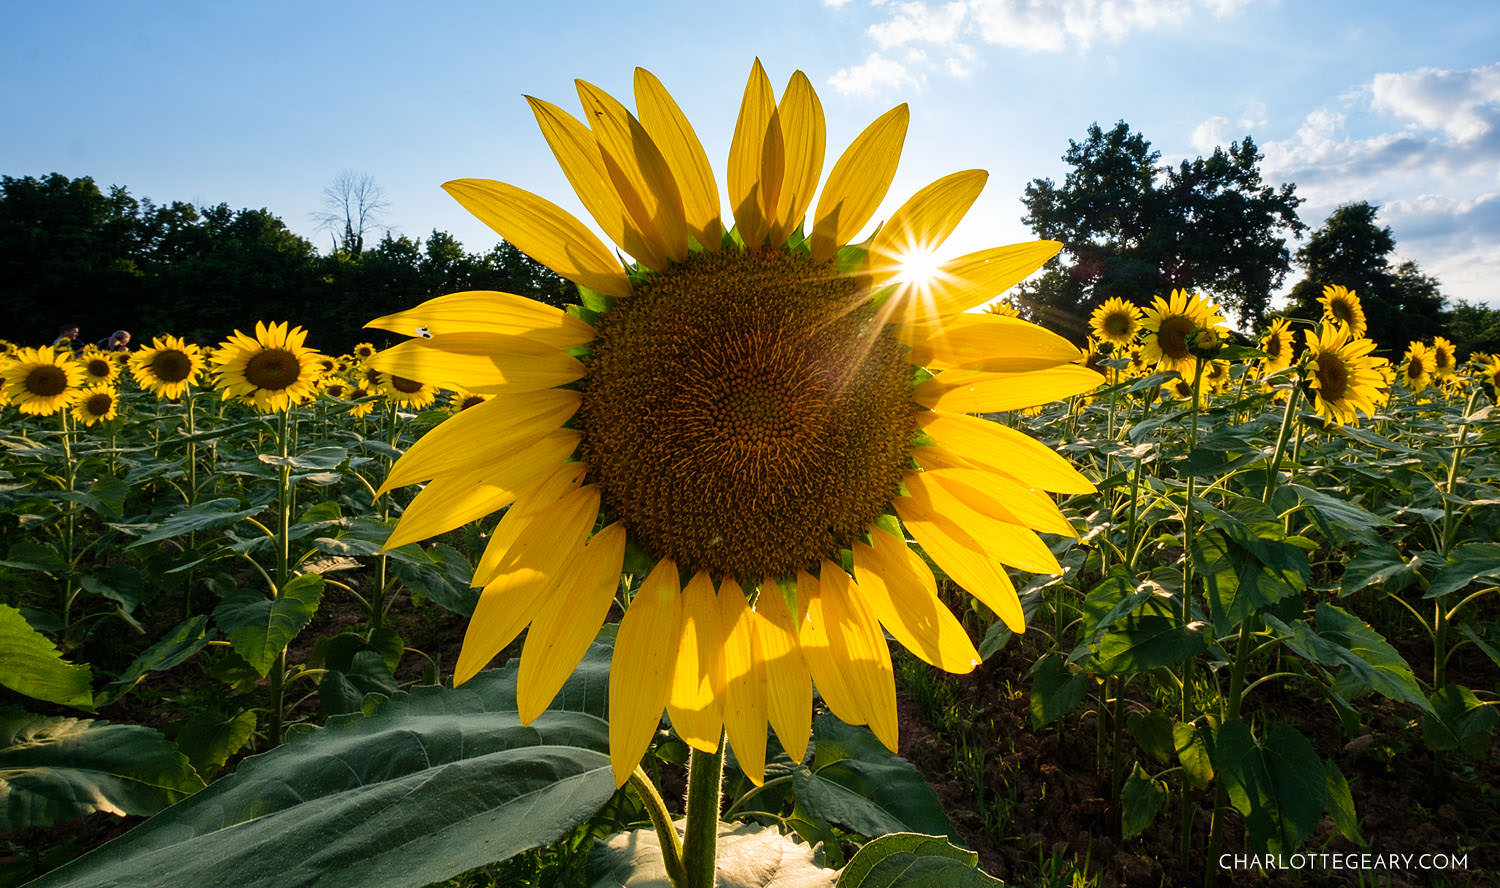 The sunflower fields of the McKee-Beshers Wildlife Management Area